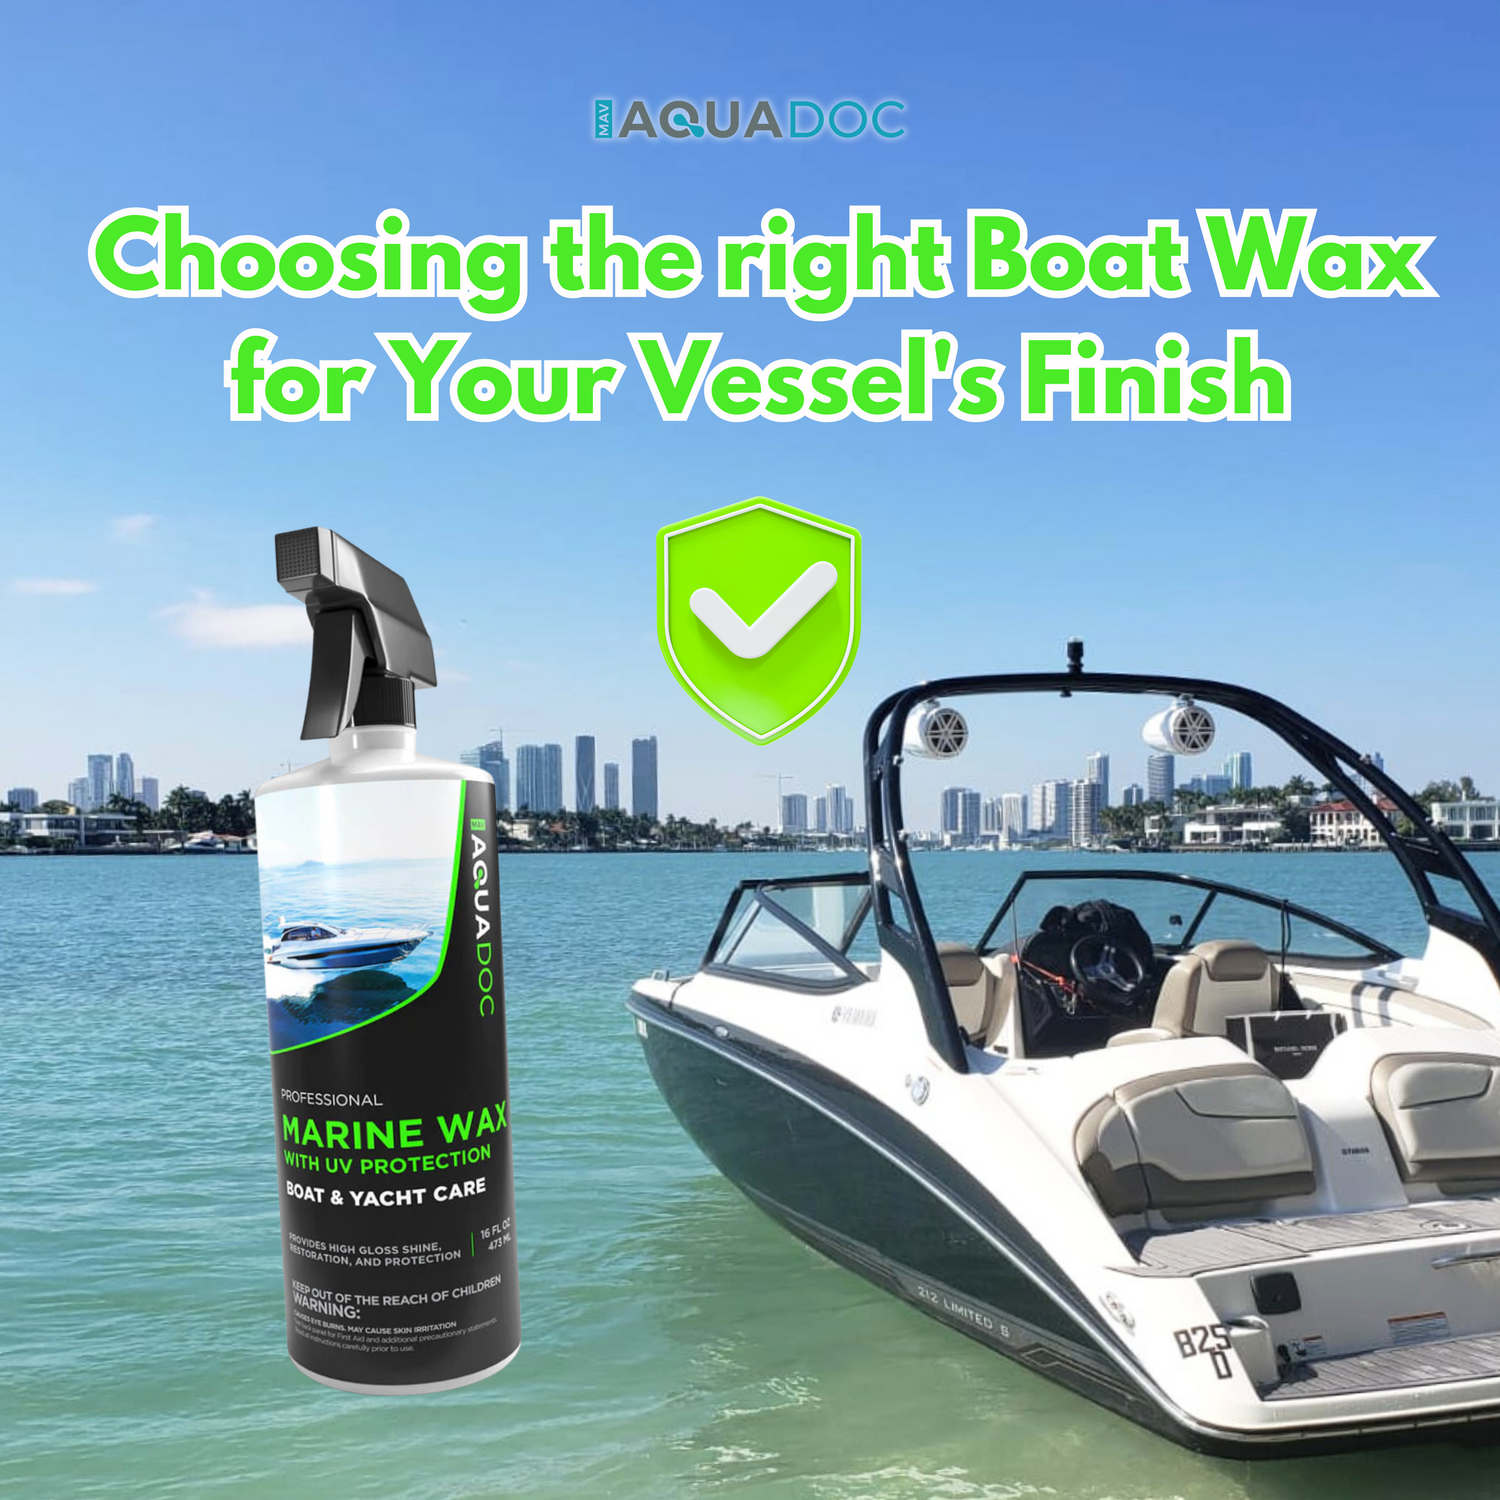 Mastering the art of boat waxing! Applying wax for long-lasting protection and dazzling shine.